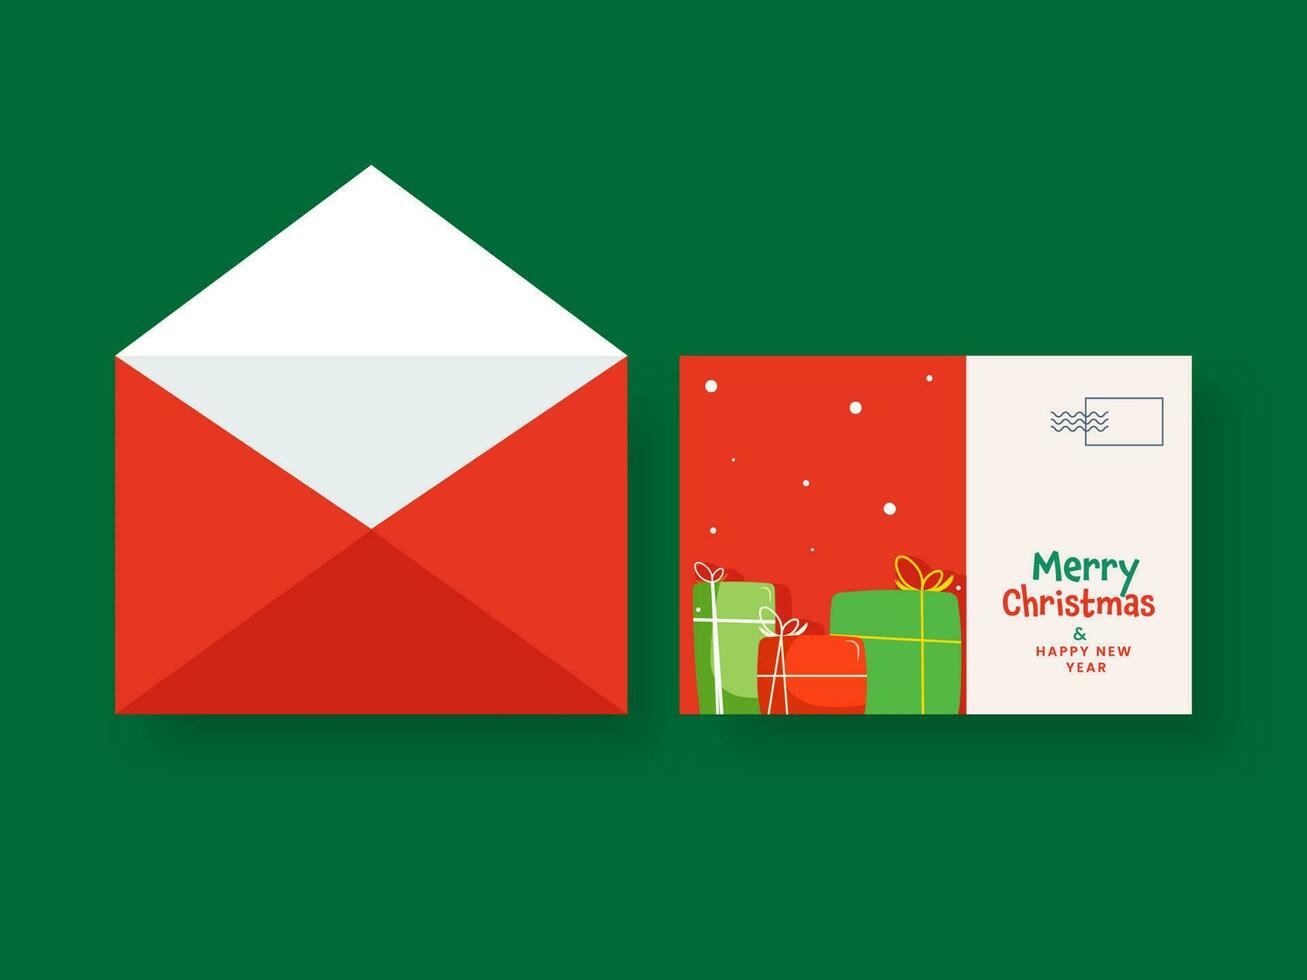 Merry Christmas And New Year Greeting Card With Envelope In Red And White Color. vector